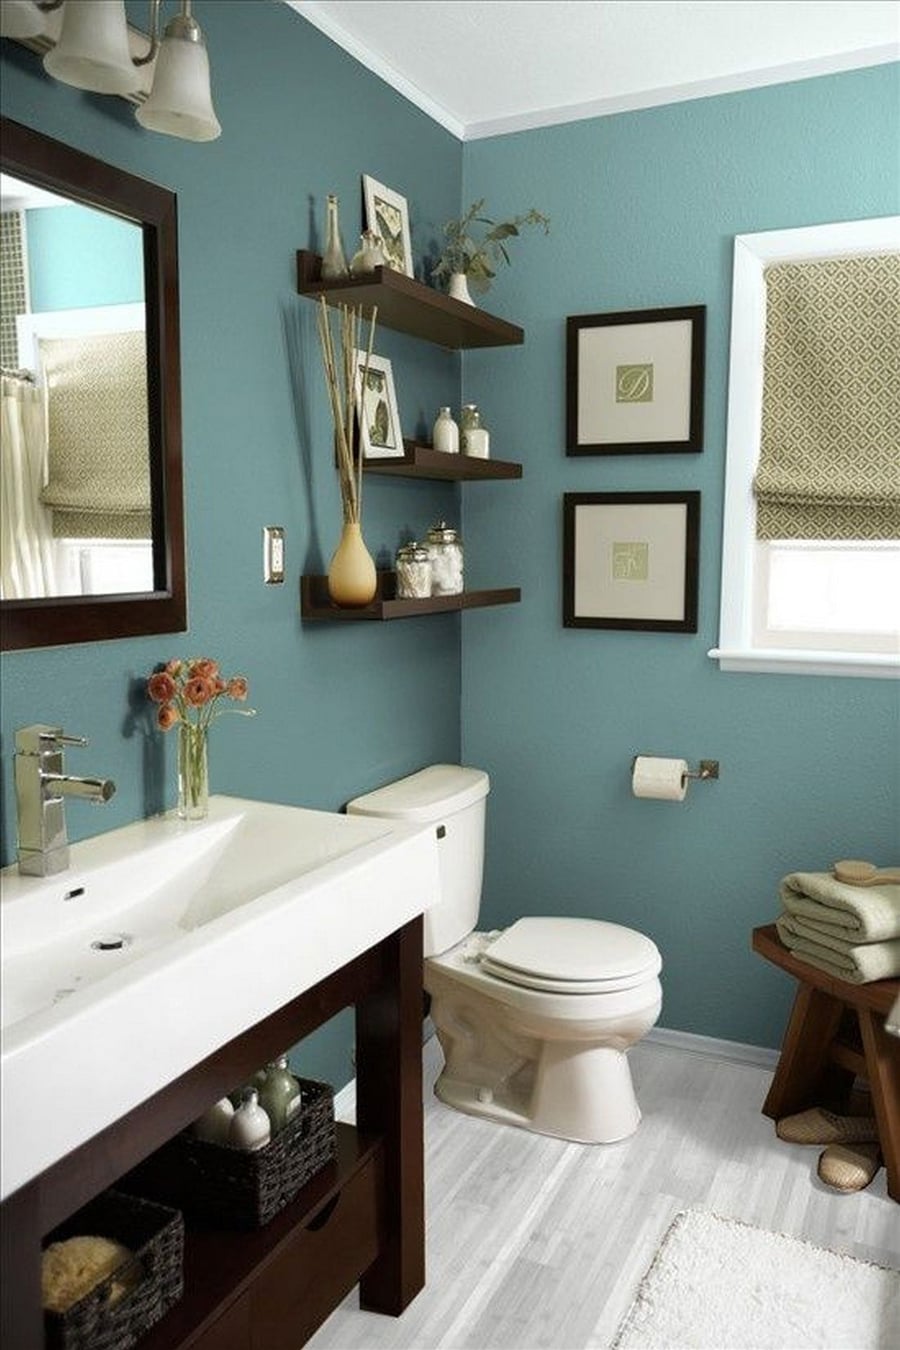 Stylish, affordable bathroom decor featured in Gap and Walmart's upcoming 